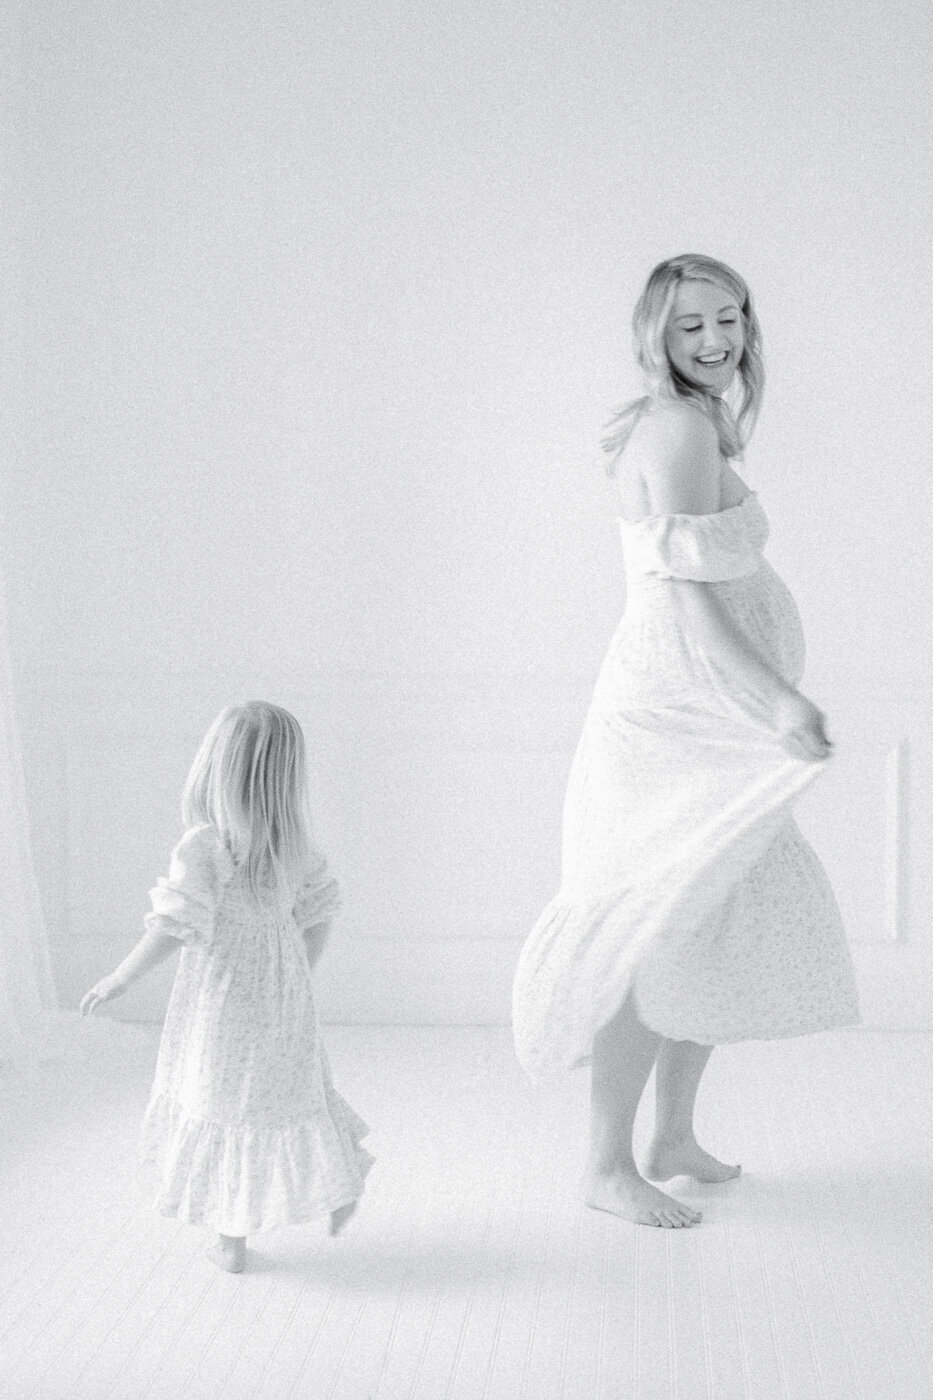 Black and white image of a pregnant mom and her daughter spinning in white dresses